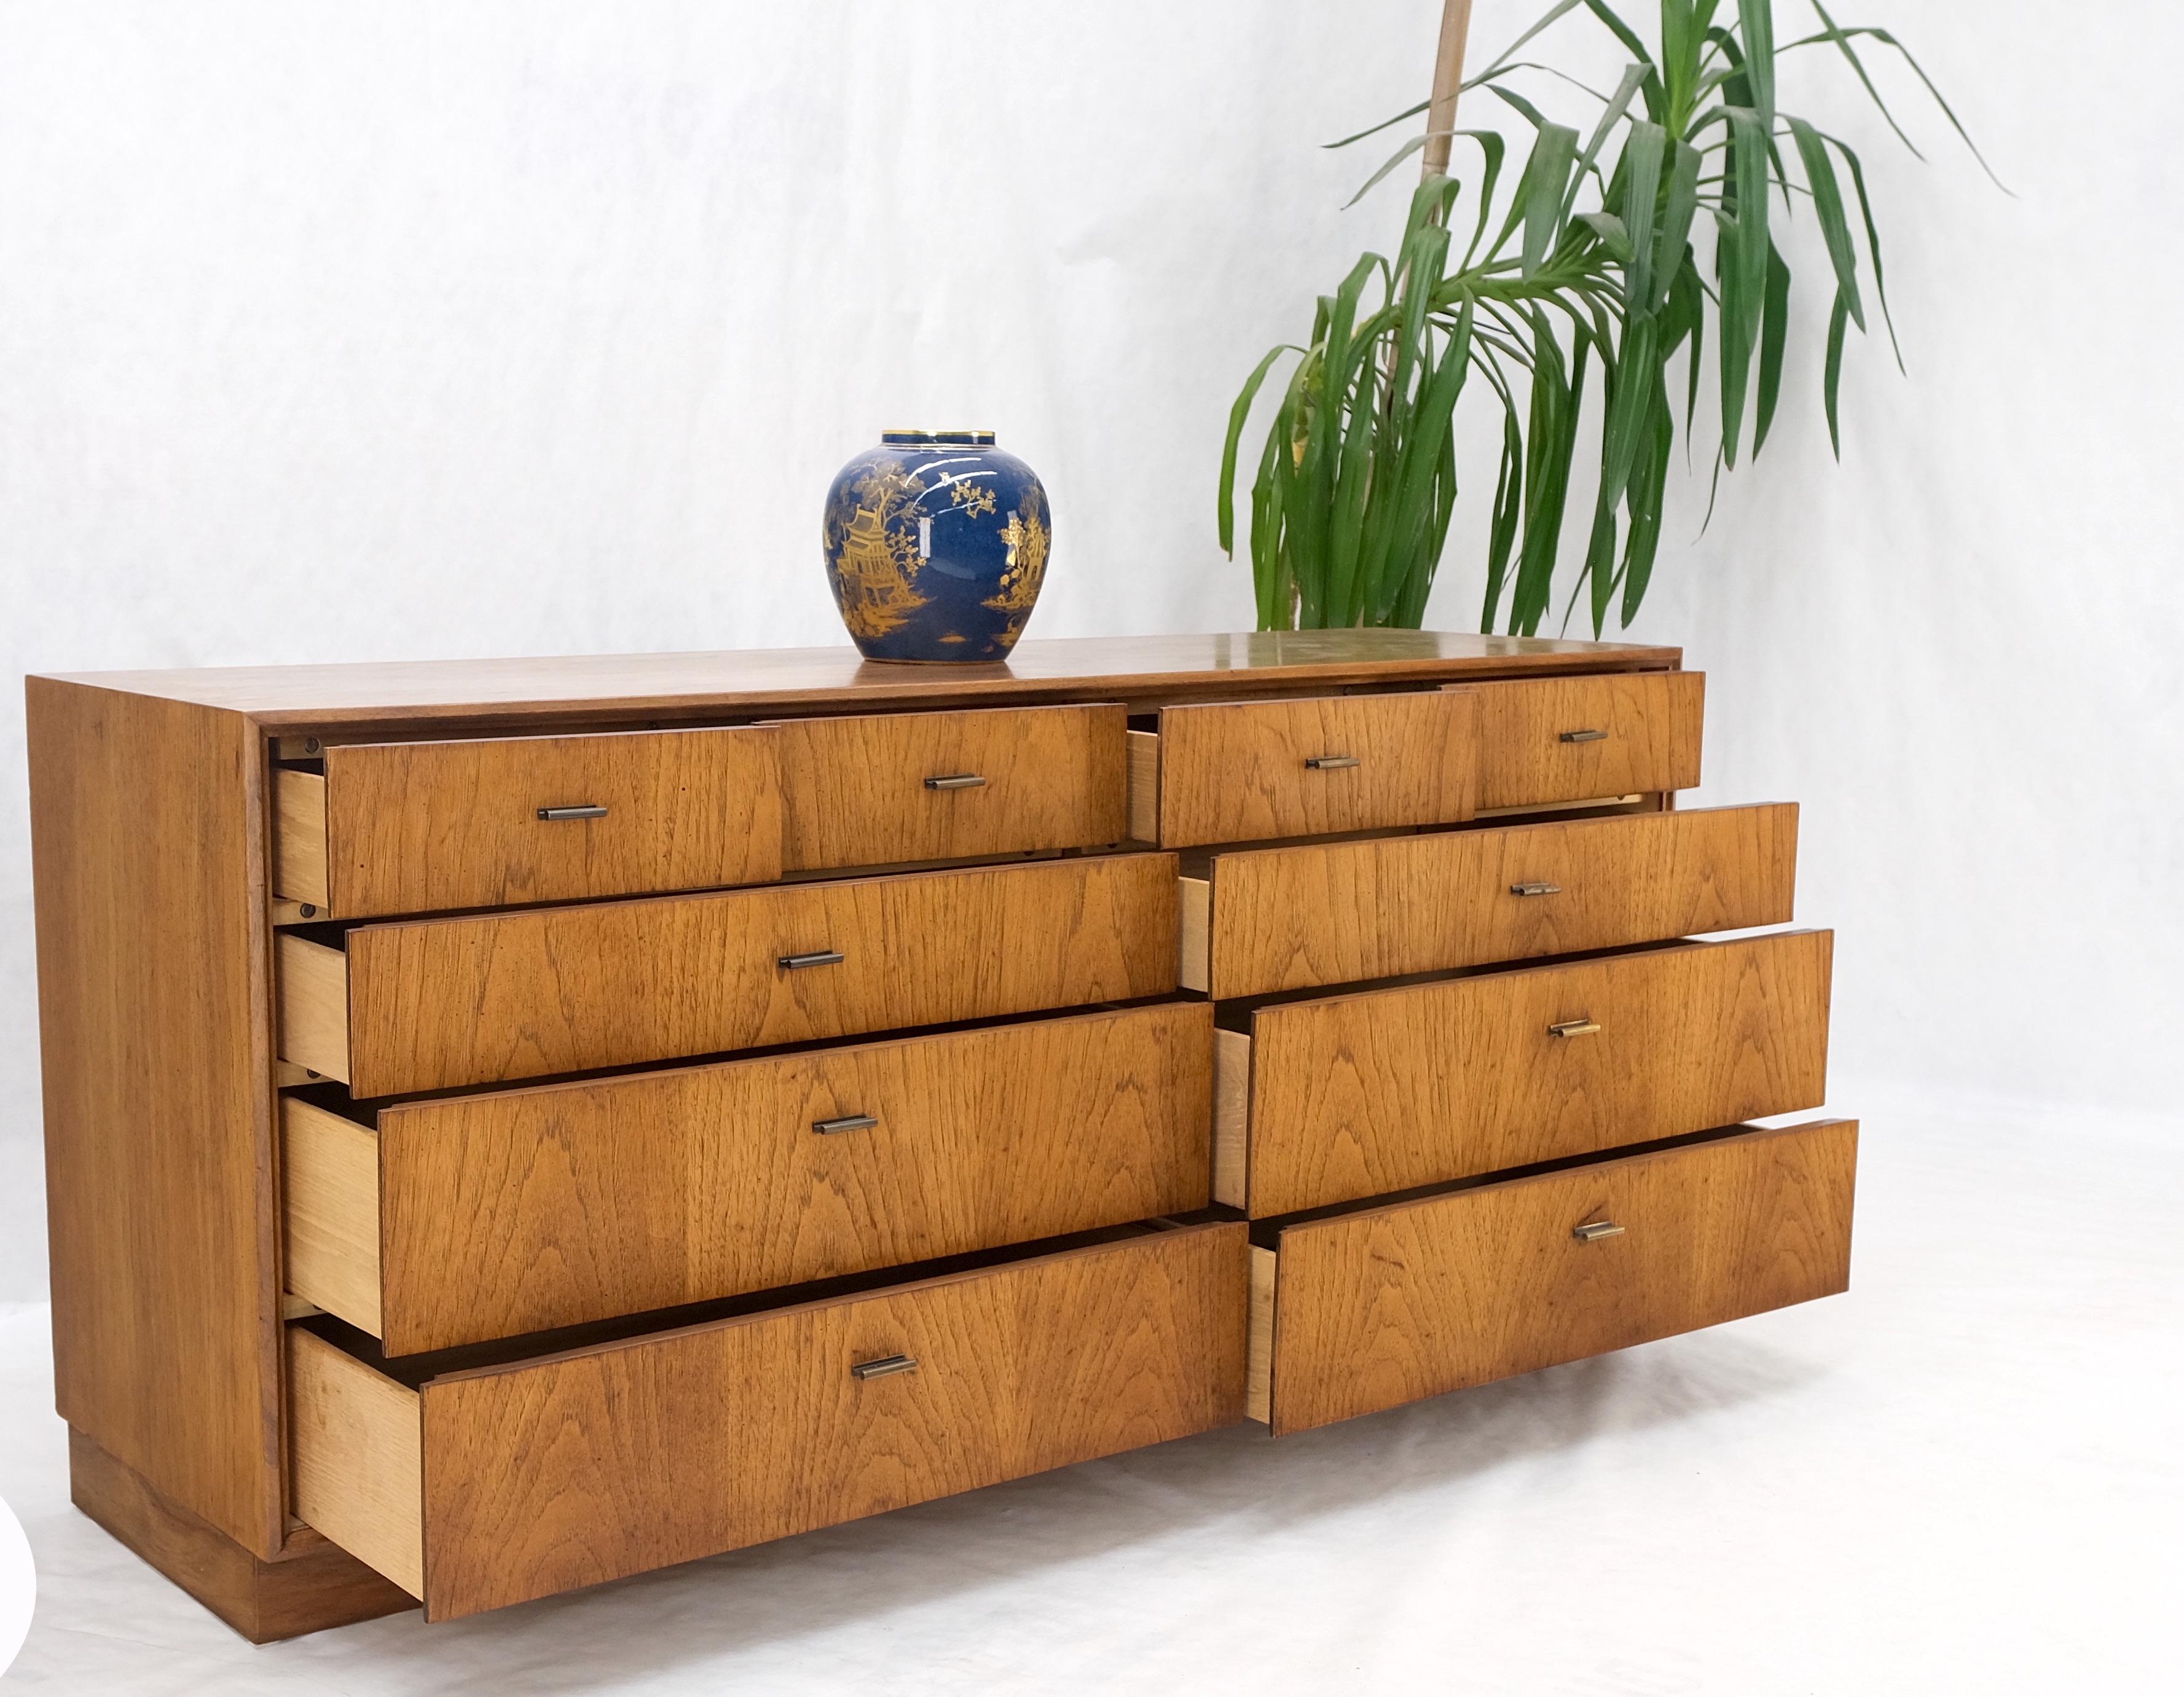 Campaign style Mid-Century Modern 10 drawers long dresser credenza mint!